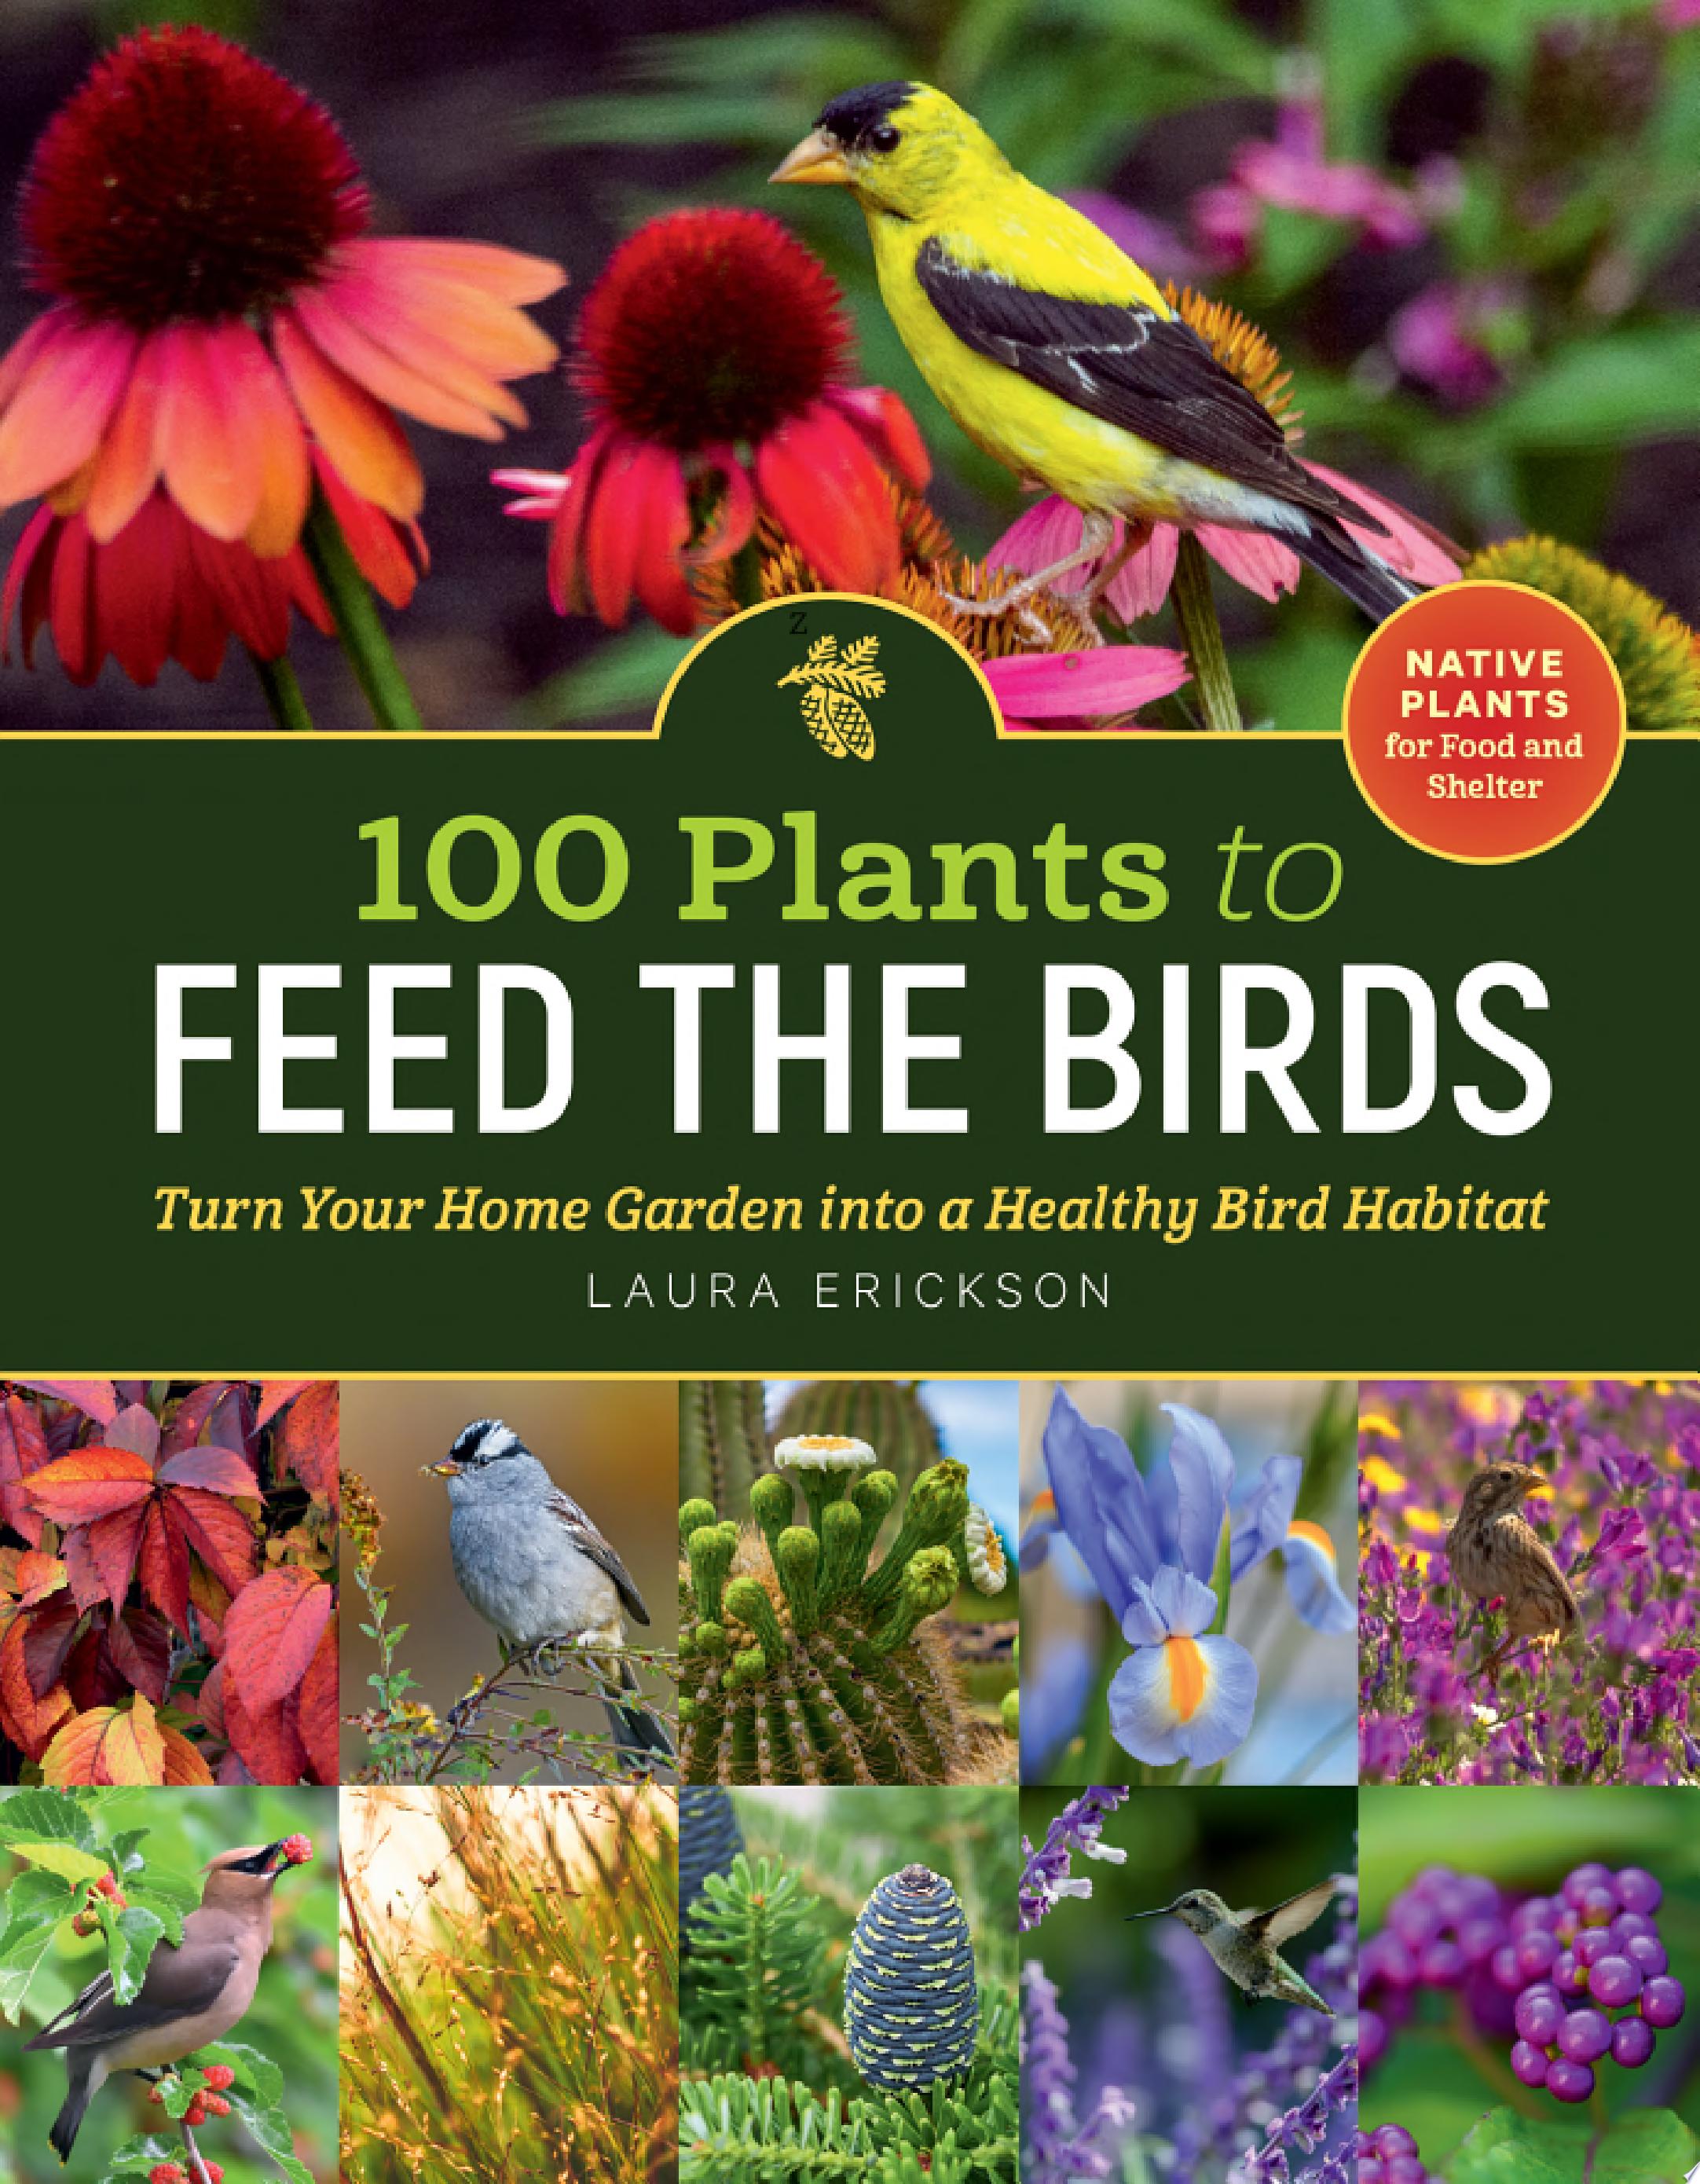 Image for "100 Plants to Feed the Birds"